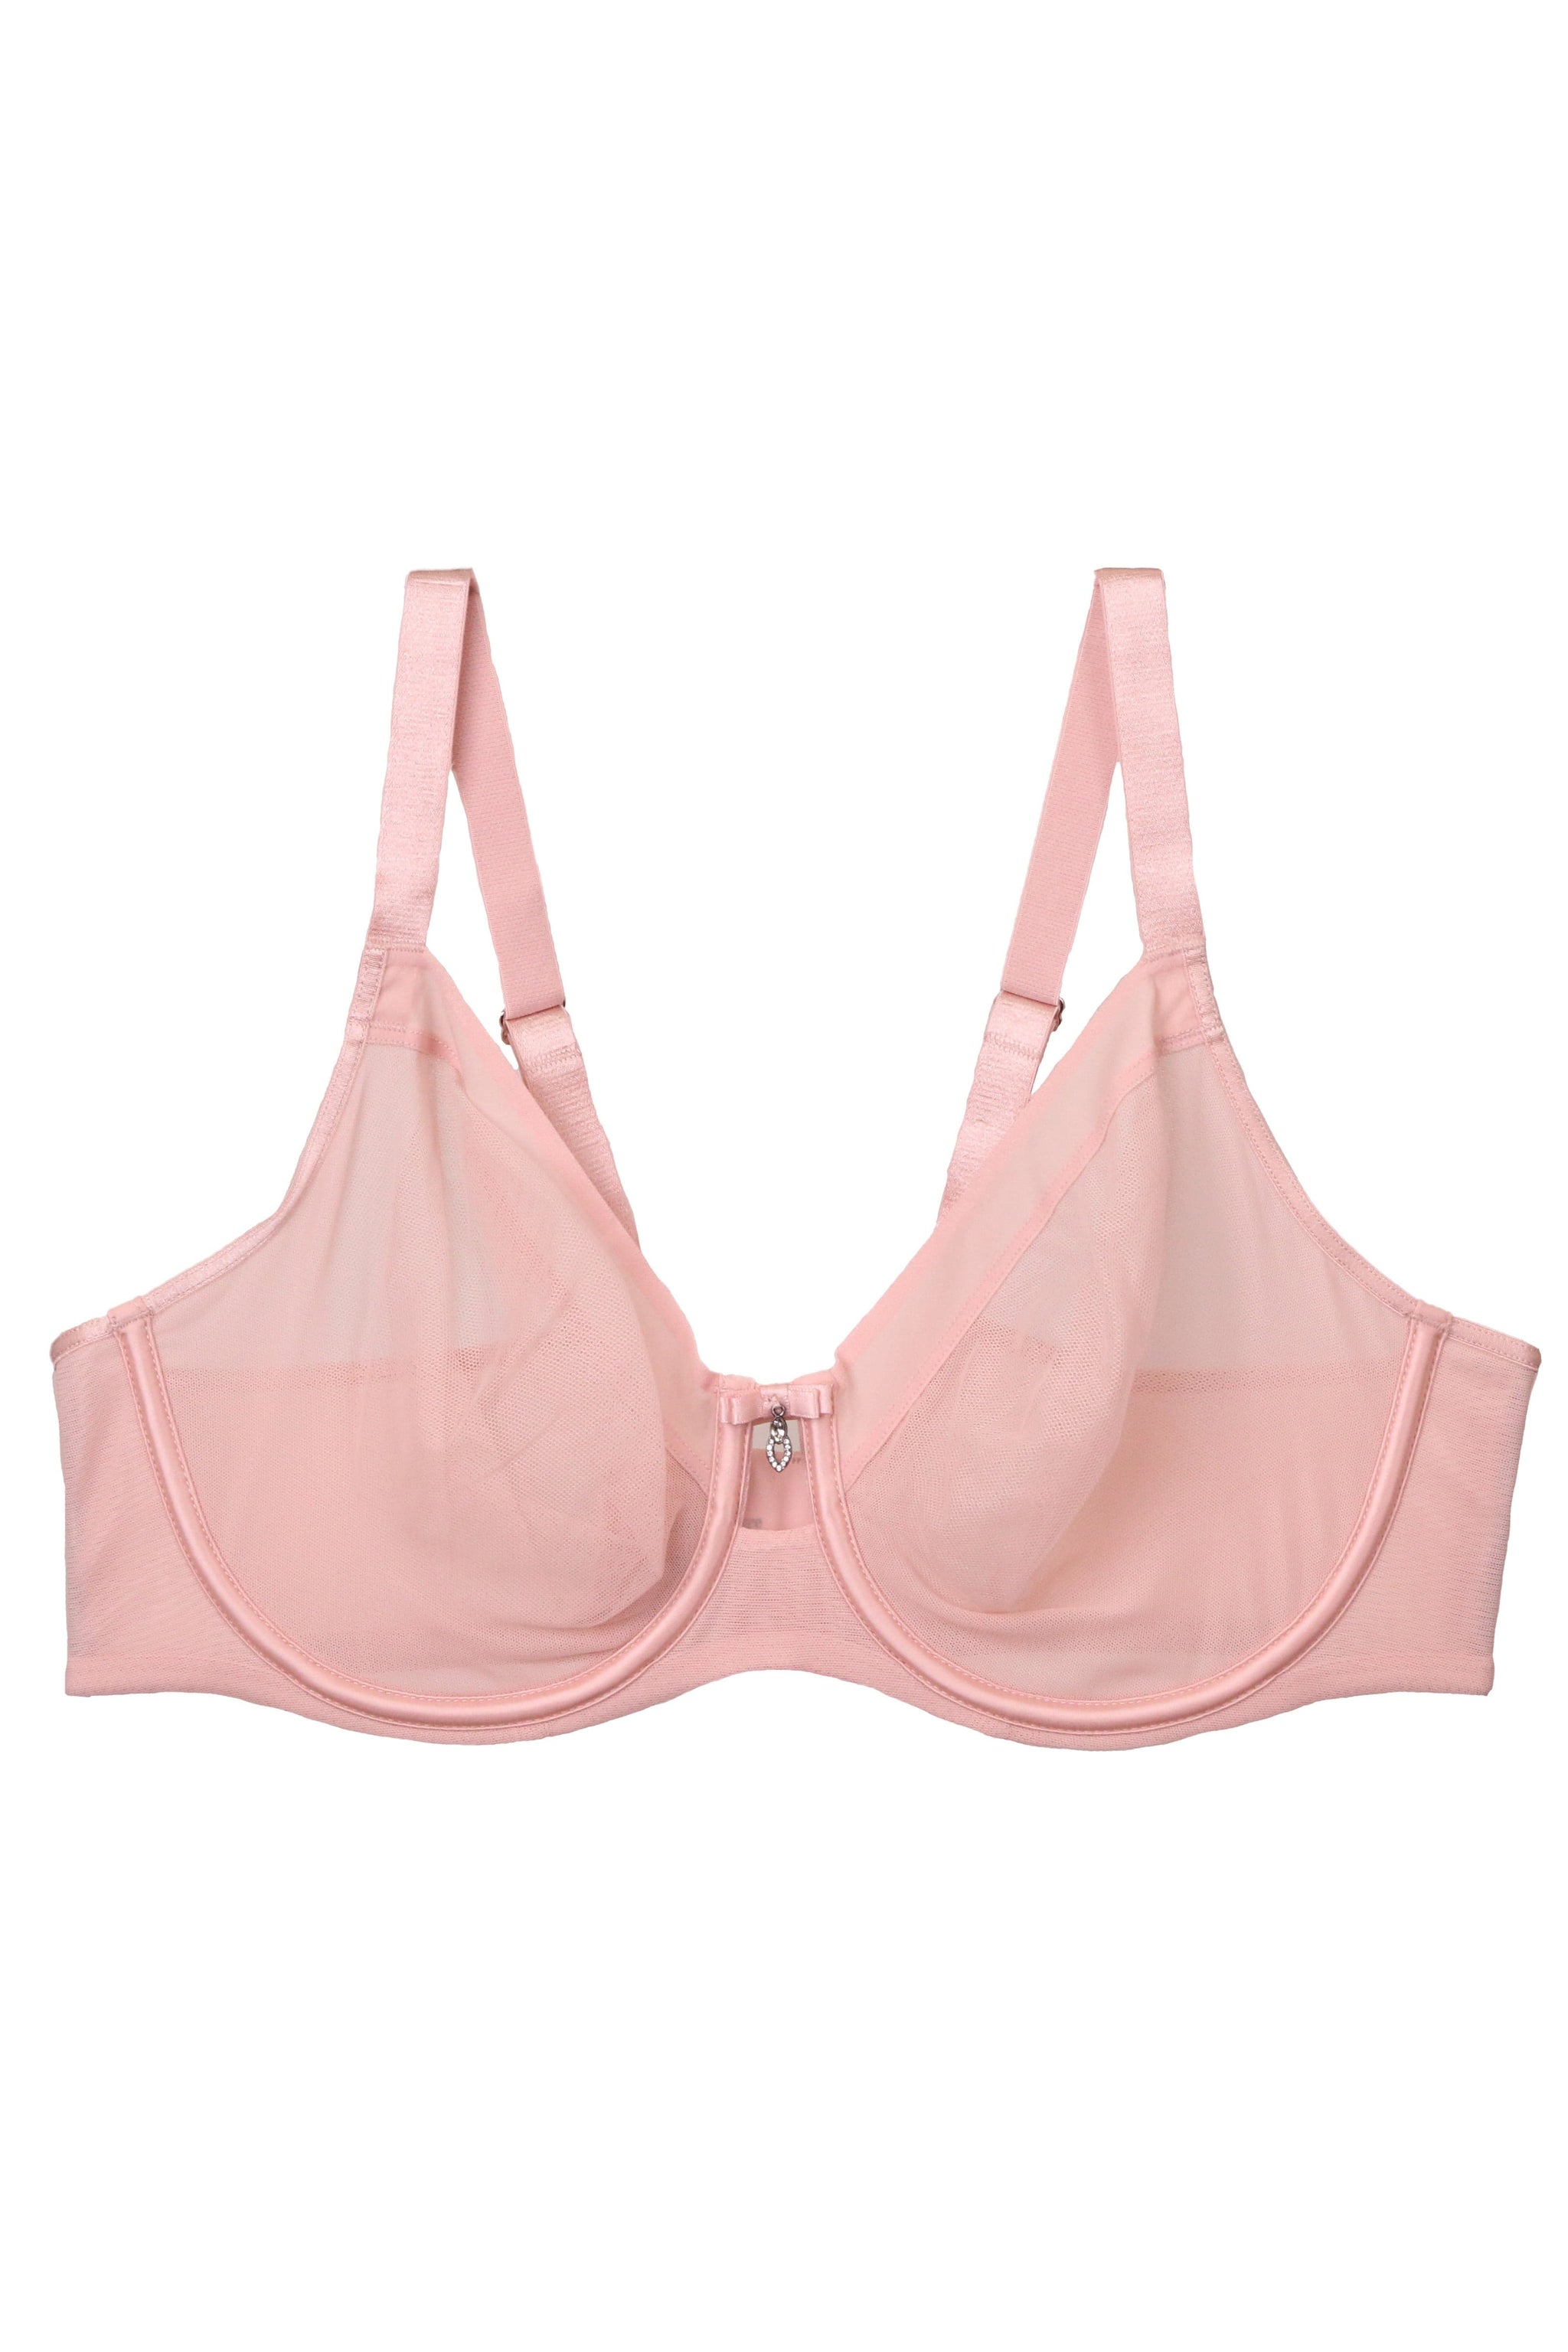 Women's Bras - Discover online a large selection of Bras - Fast delivery